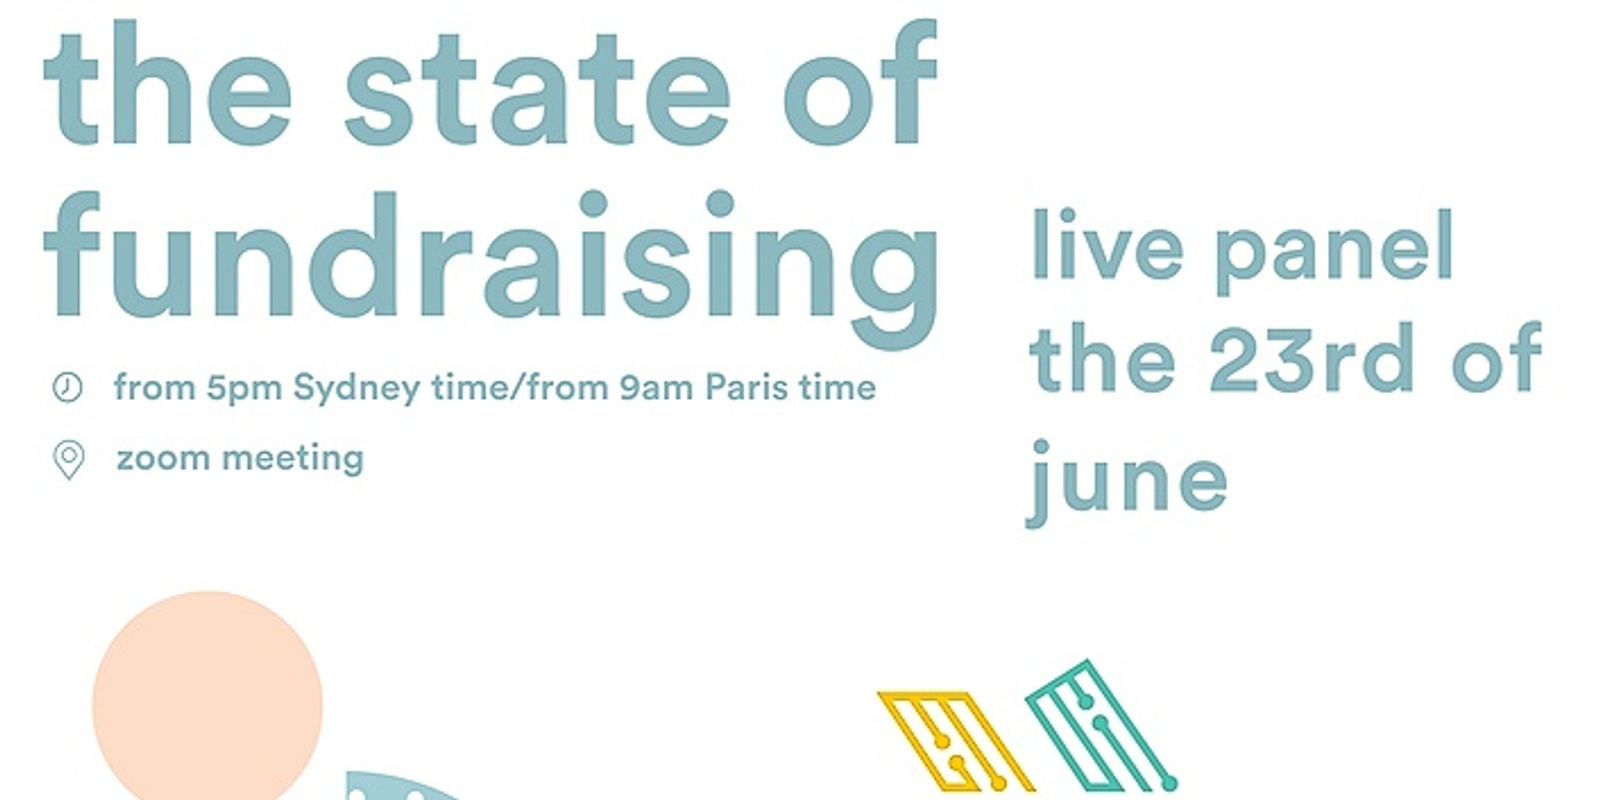 Banner image for The state of fundraising under economic uncertainty